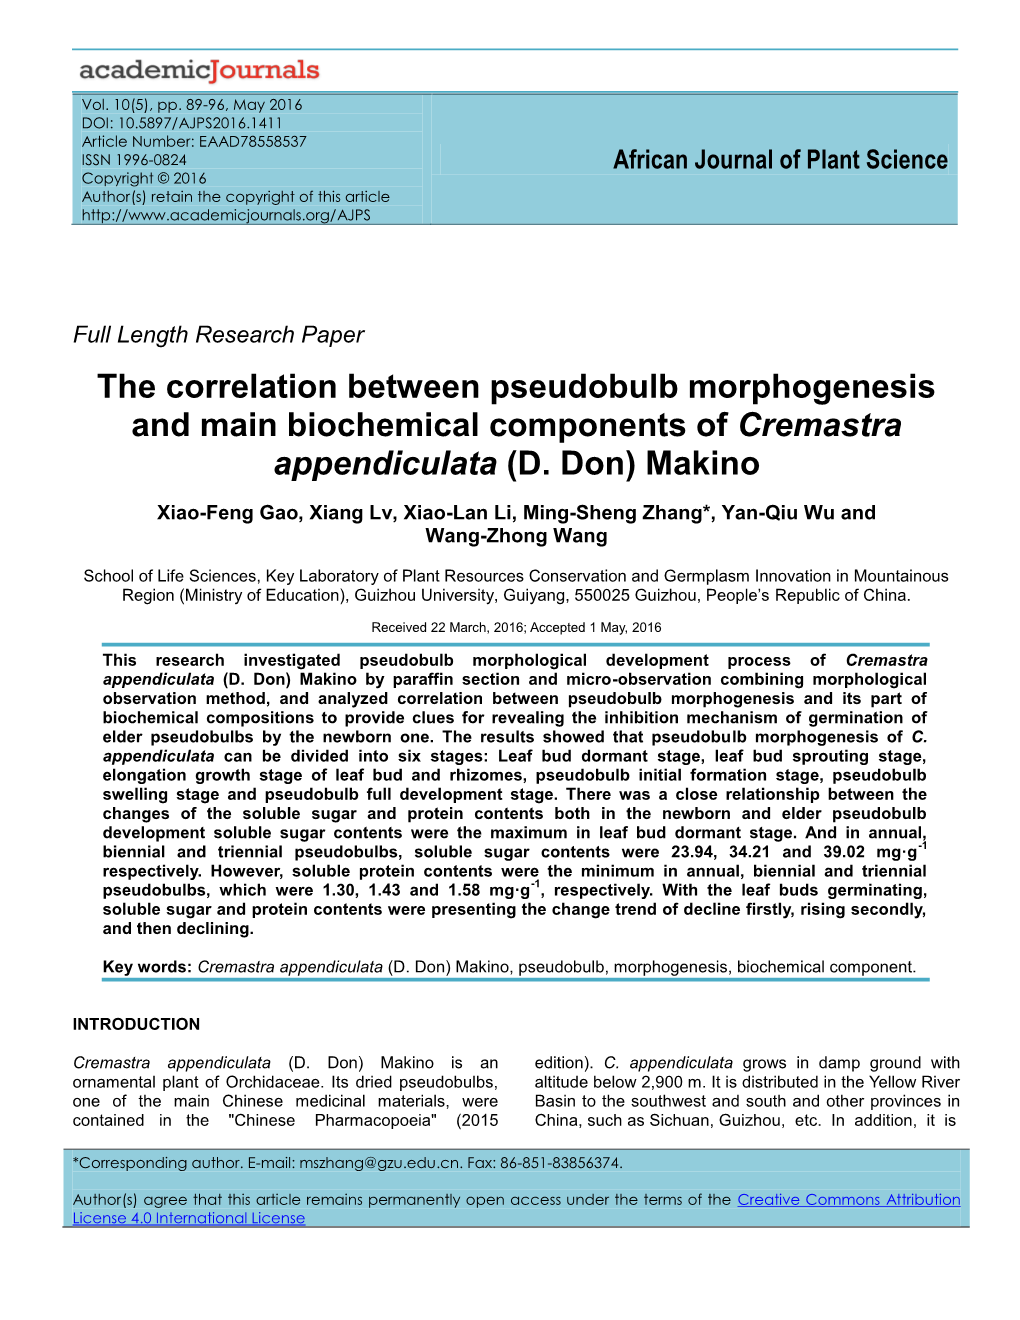 The Correlation Between Pseudobulb Morphogenesis and Main Biochemical Components of Cremastra Appendiculata (D